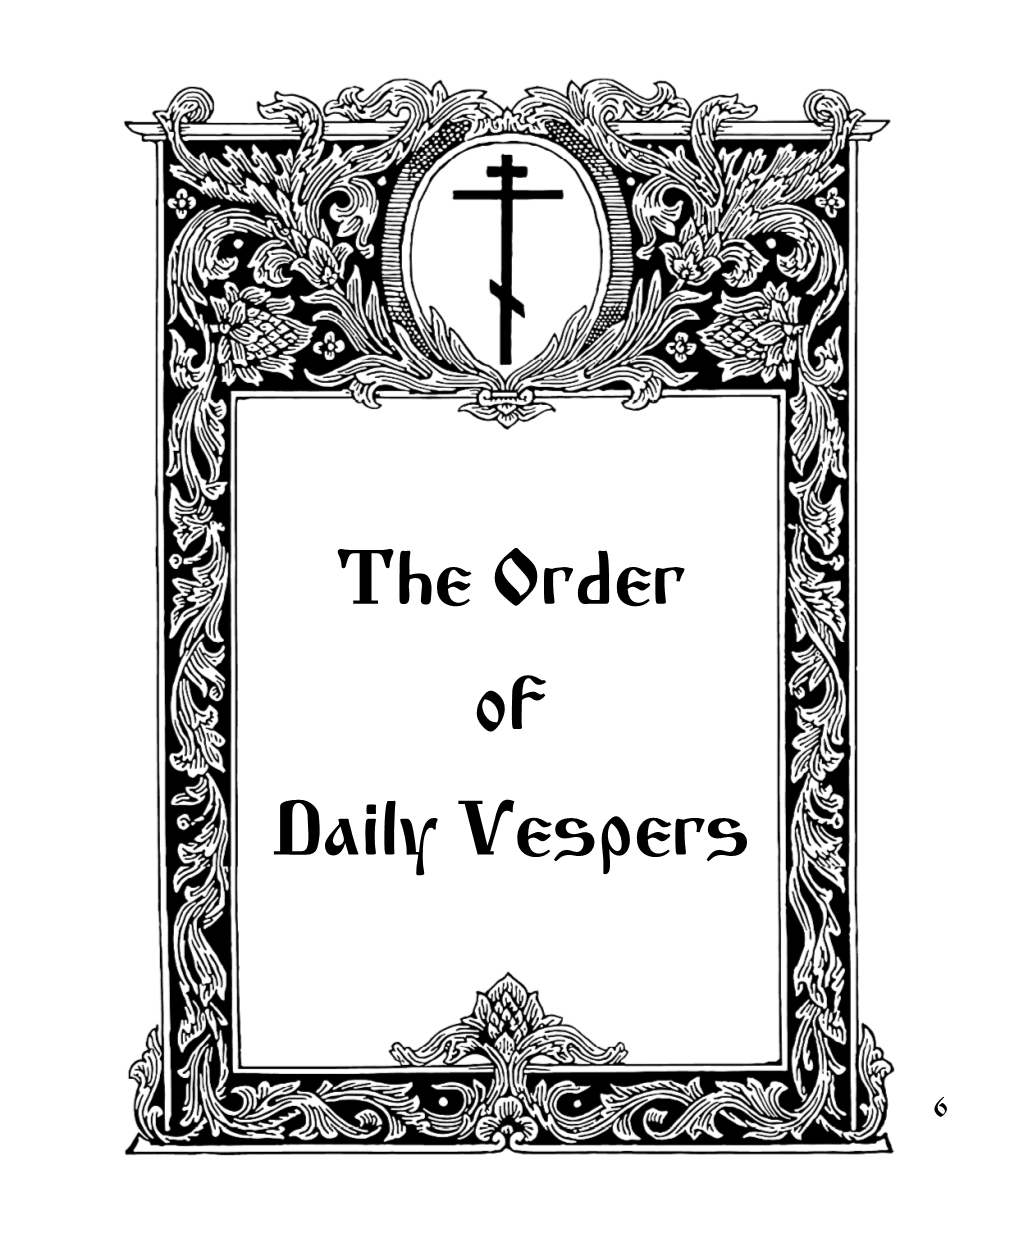 The Order of Daily Vespers